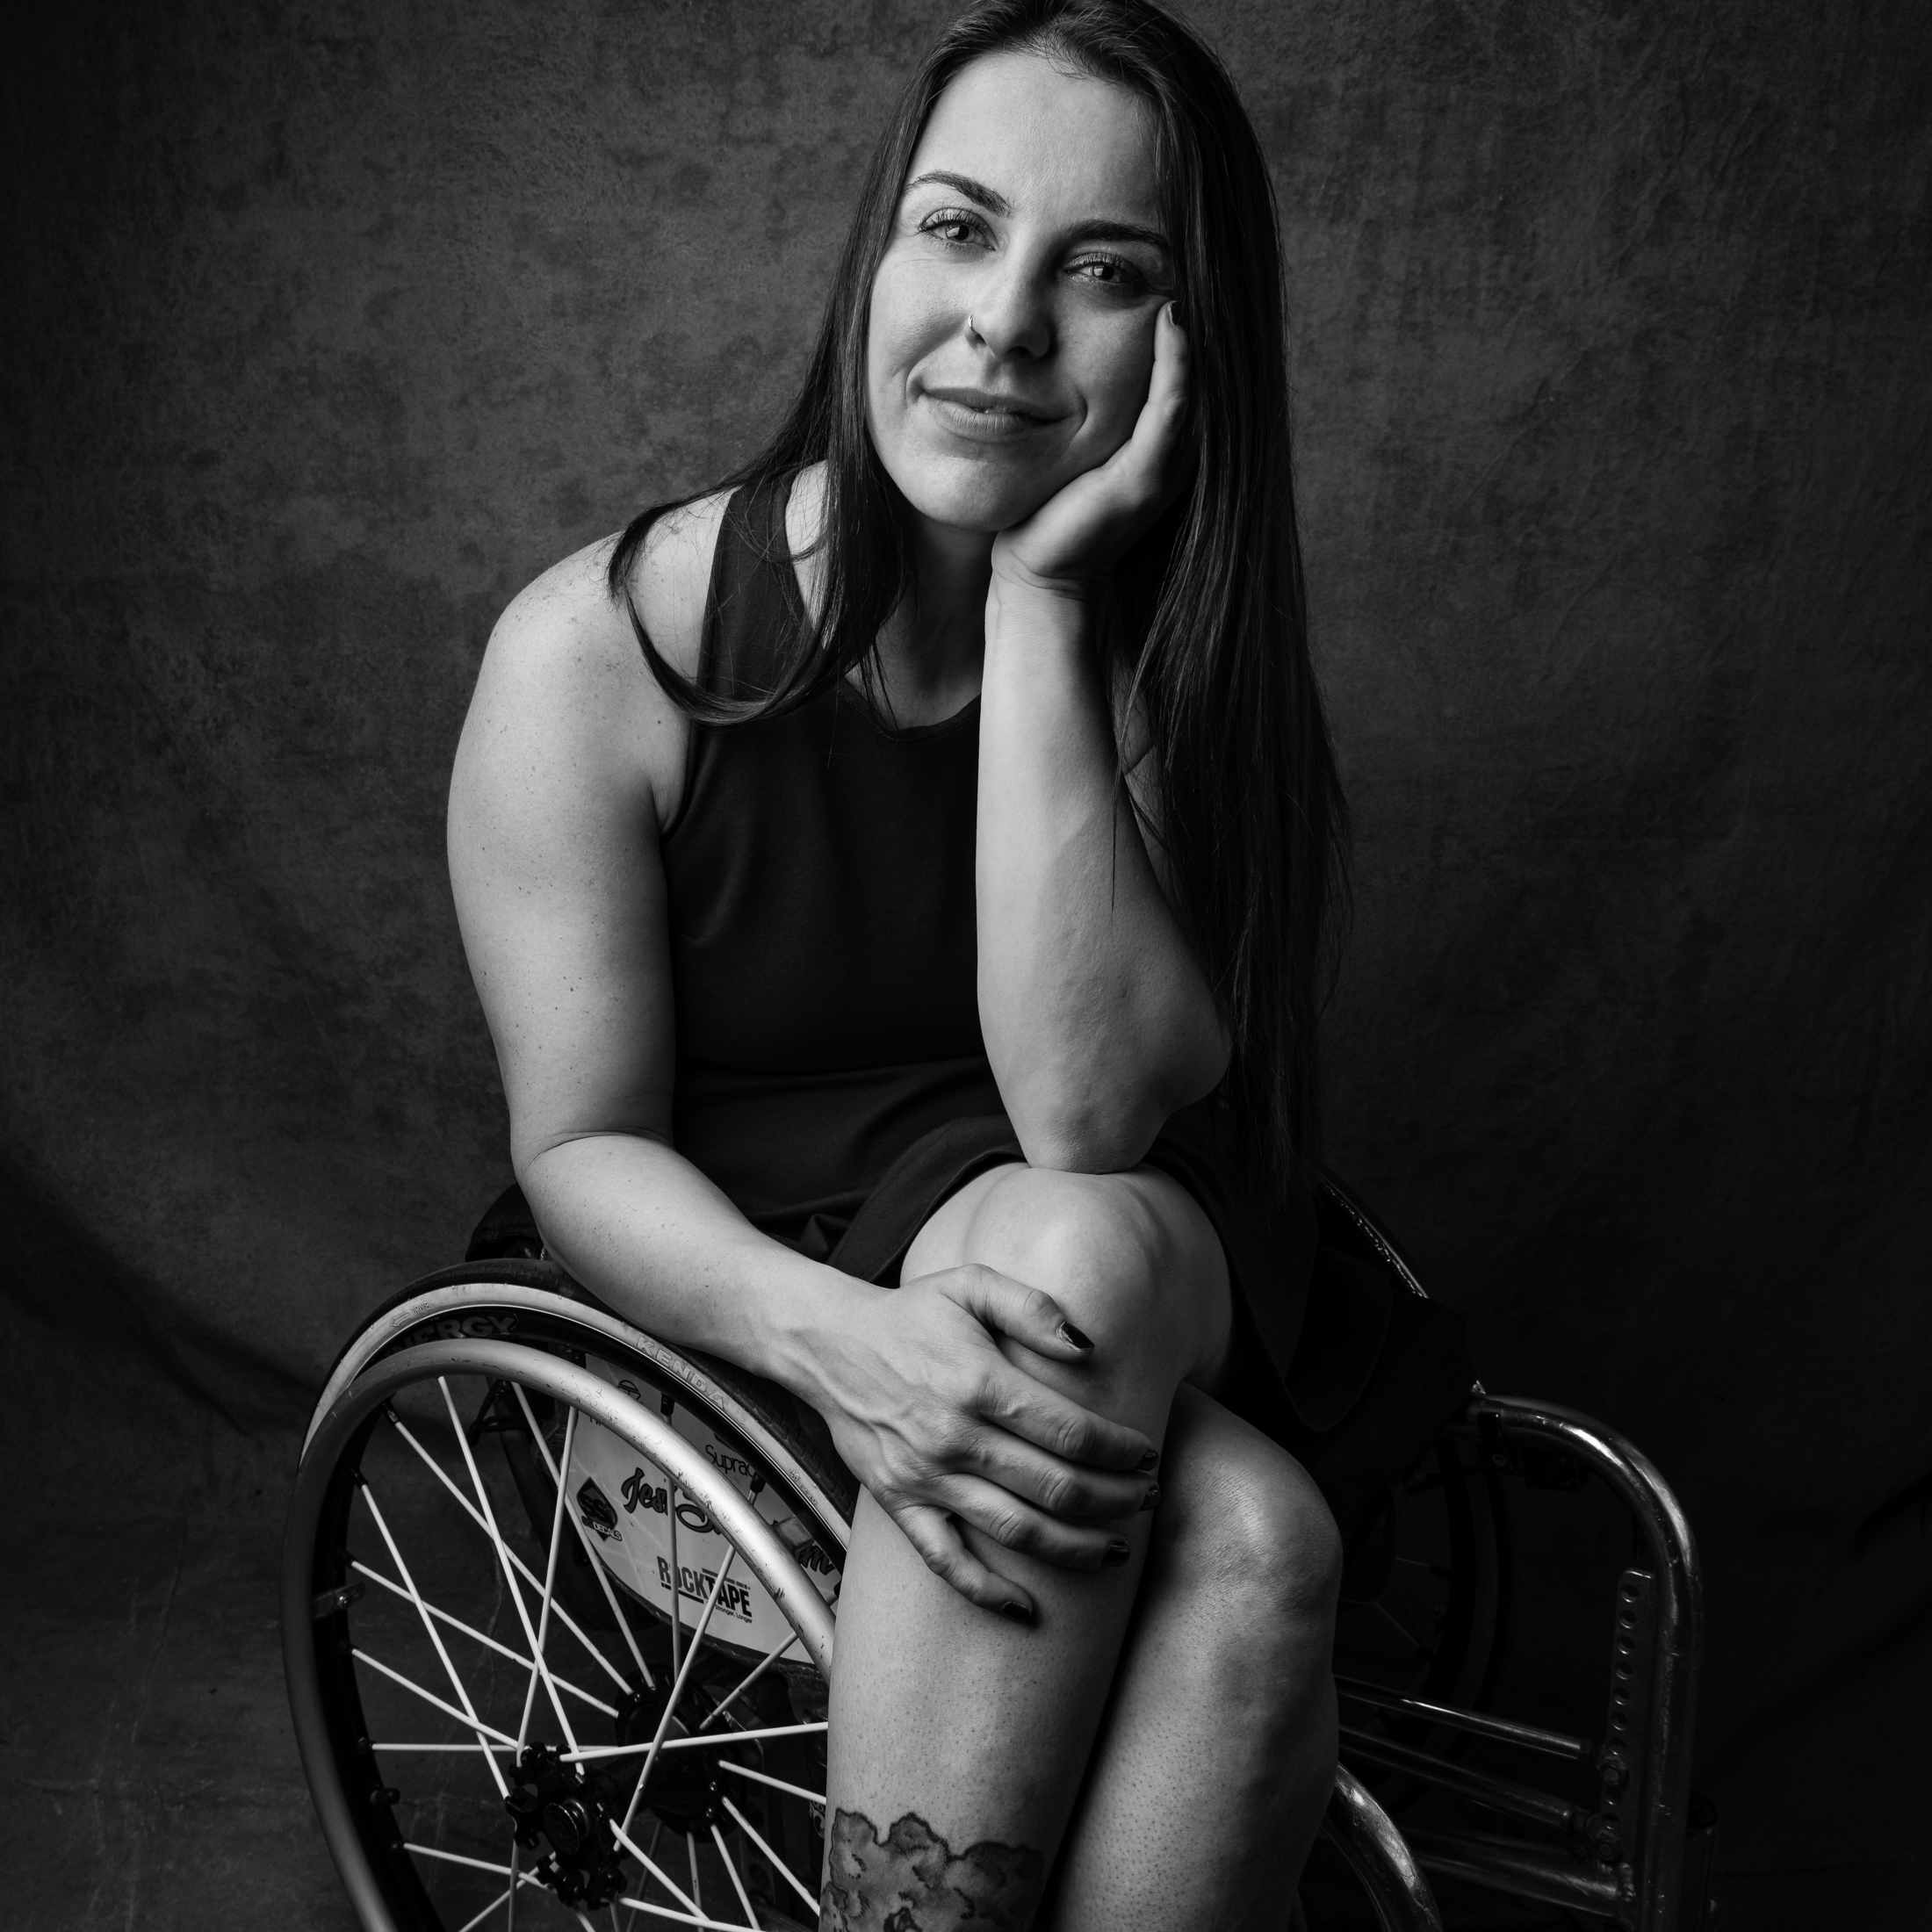 Black-and-white portrait photograph of a woman sitting in a wheelchair